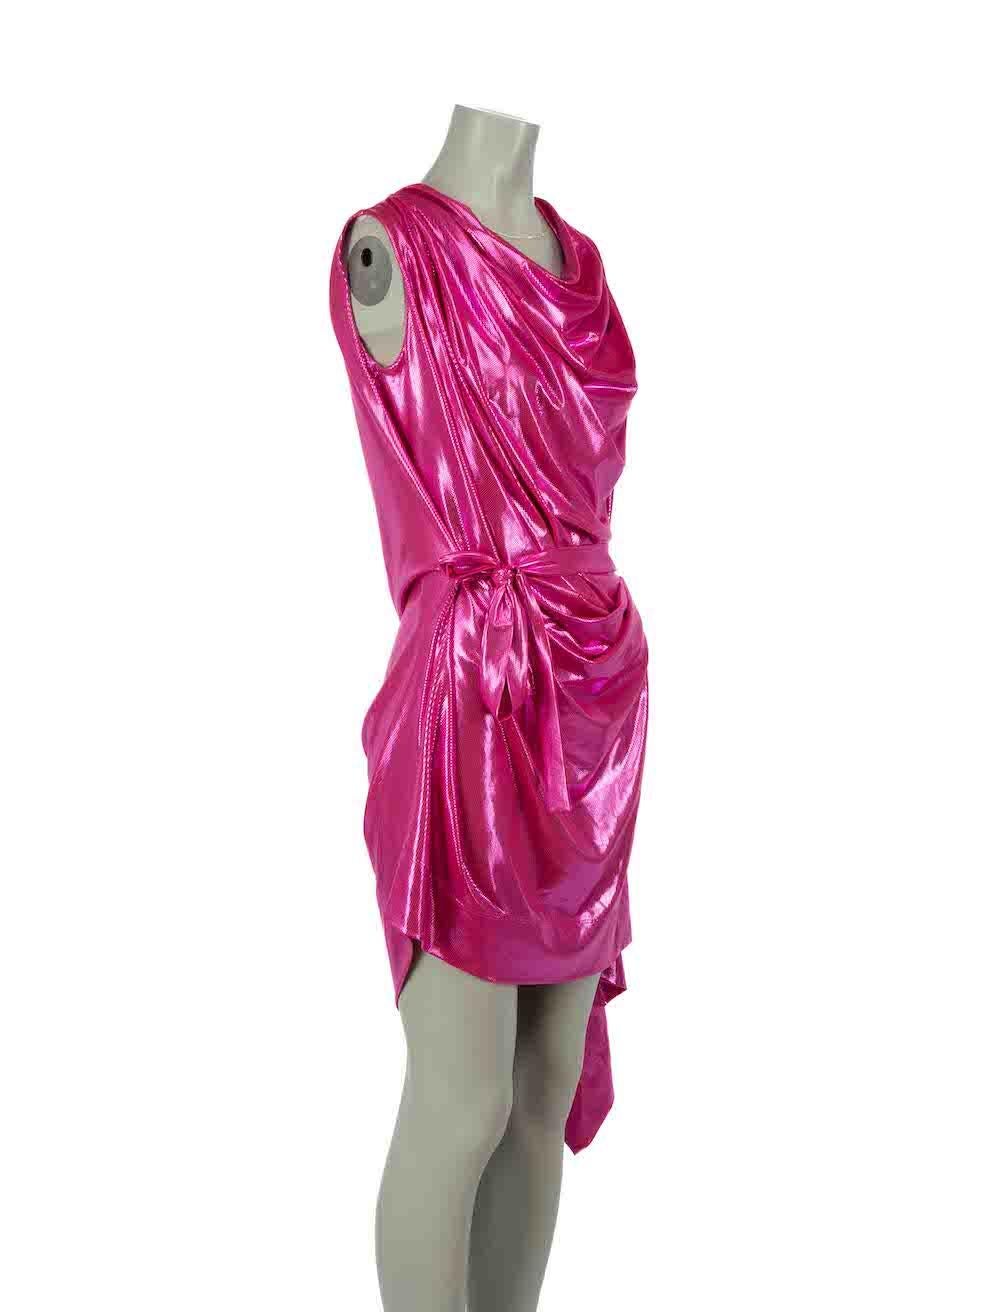 CONDITION is Very good. Hardly any visible wear to dress is evident on this used Vivienne Westwood Red Label designer resale item.

Details
Pink
Polyester
Dress
Cowl neck
Mini
Sleeveless
Asymmetric draped
Waist tie detail 

Made in Italy